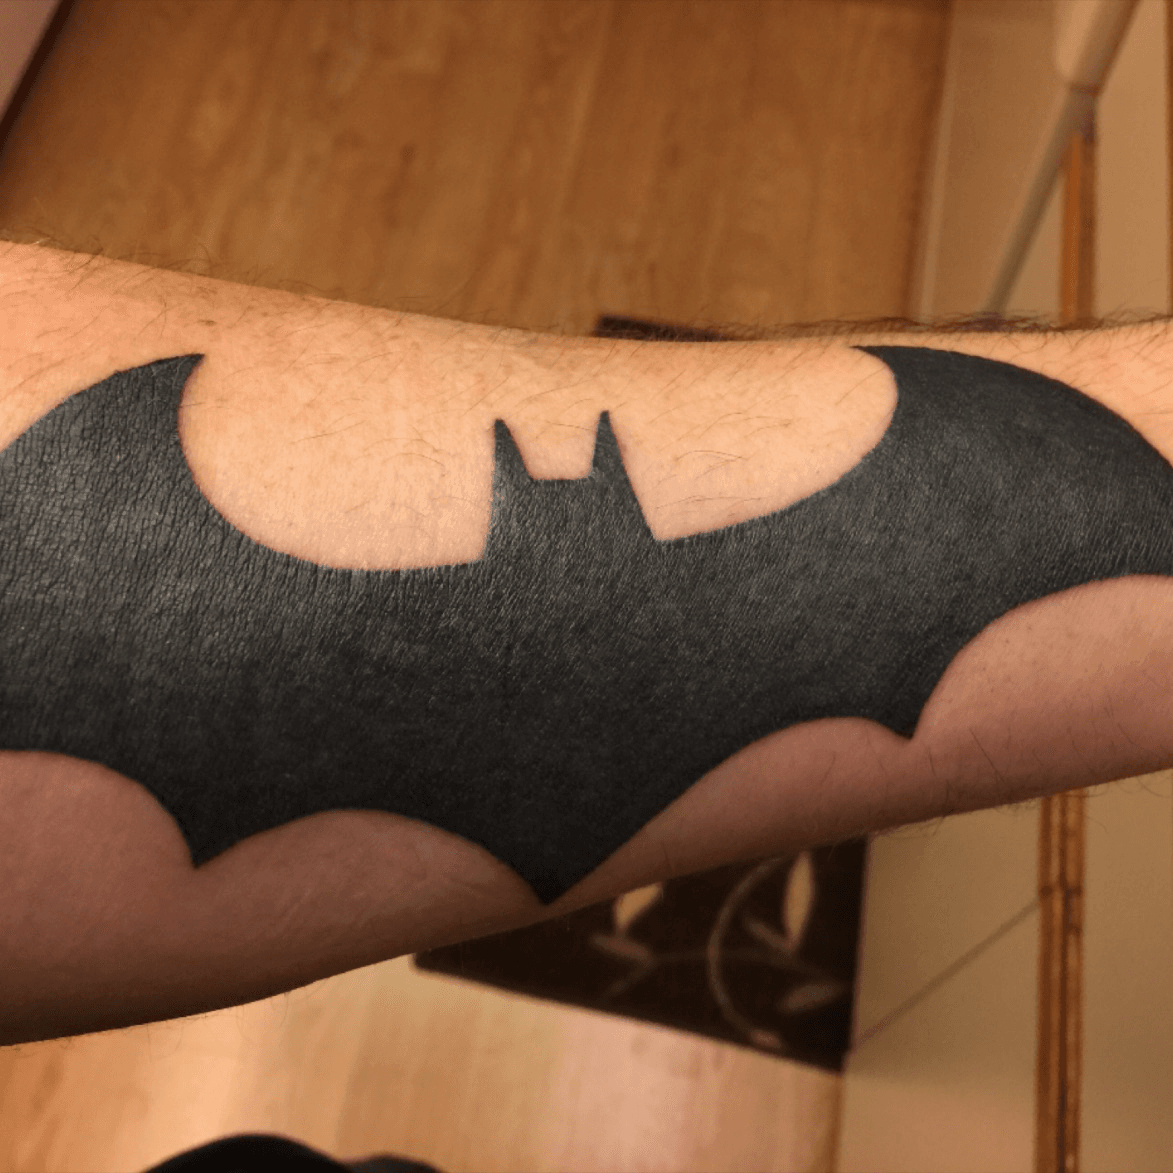 Fredo on X Batman logo tattoo almost done selftattooing patterns  art I started this one 8 years ago finally finishing it  httpstcoKMa9RmkXiN  X